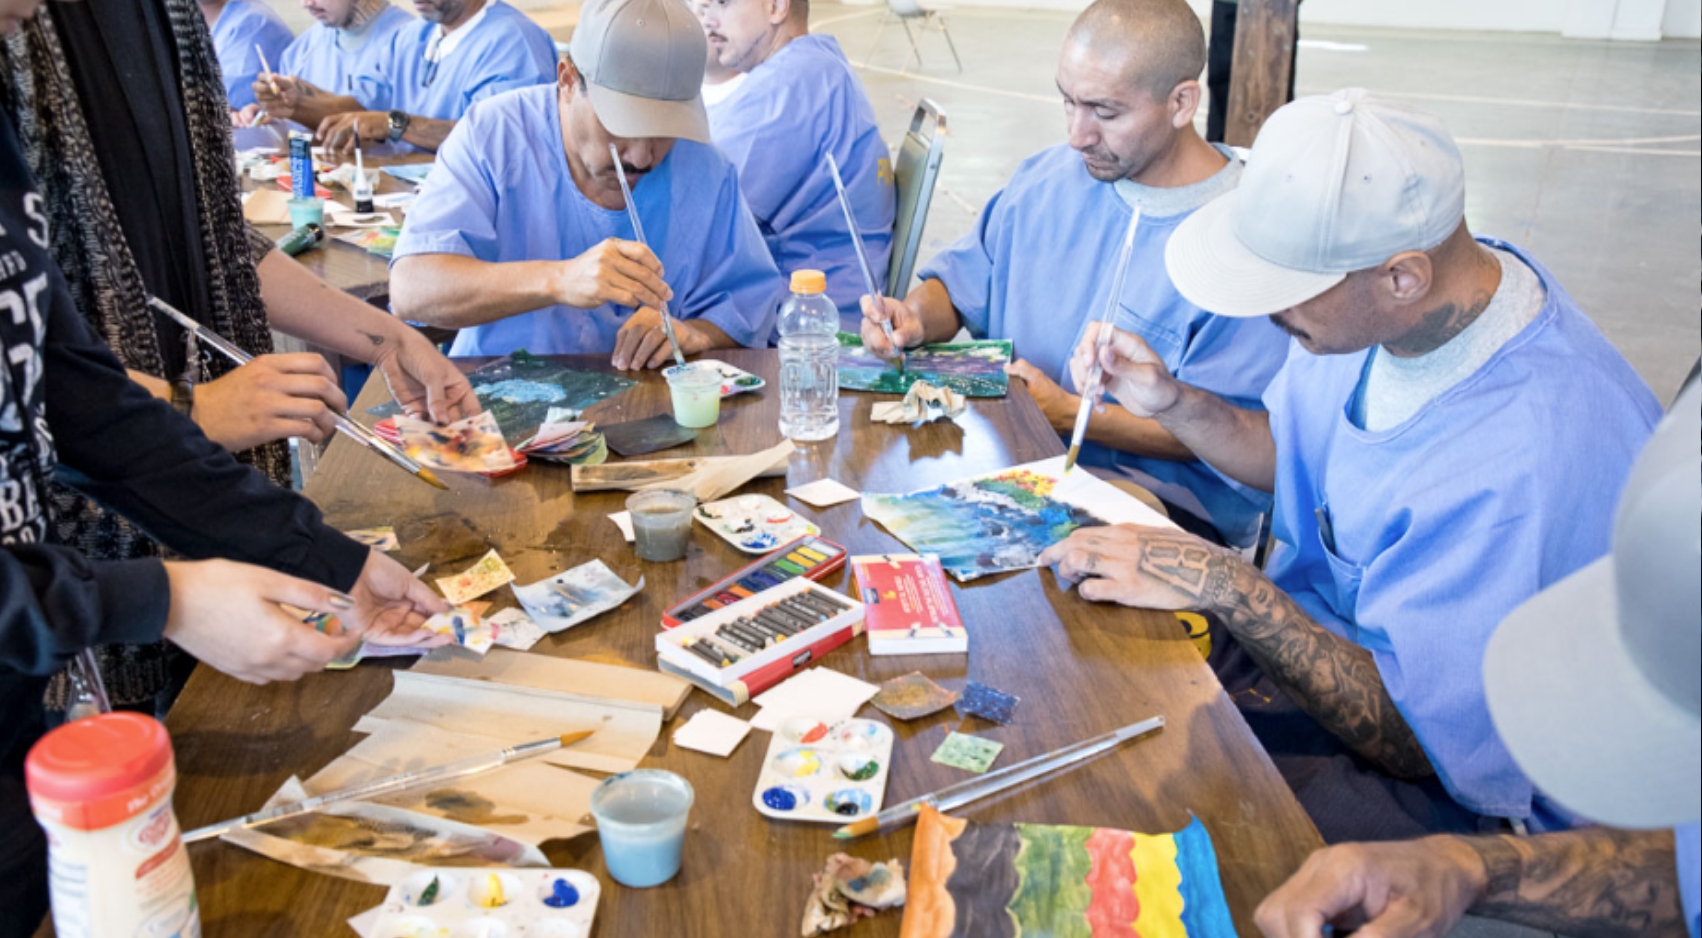 PAC provides visual and interdisciplinary arts programming to people experiencing incarceration in California state prisons.